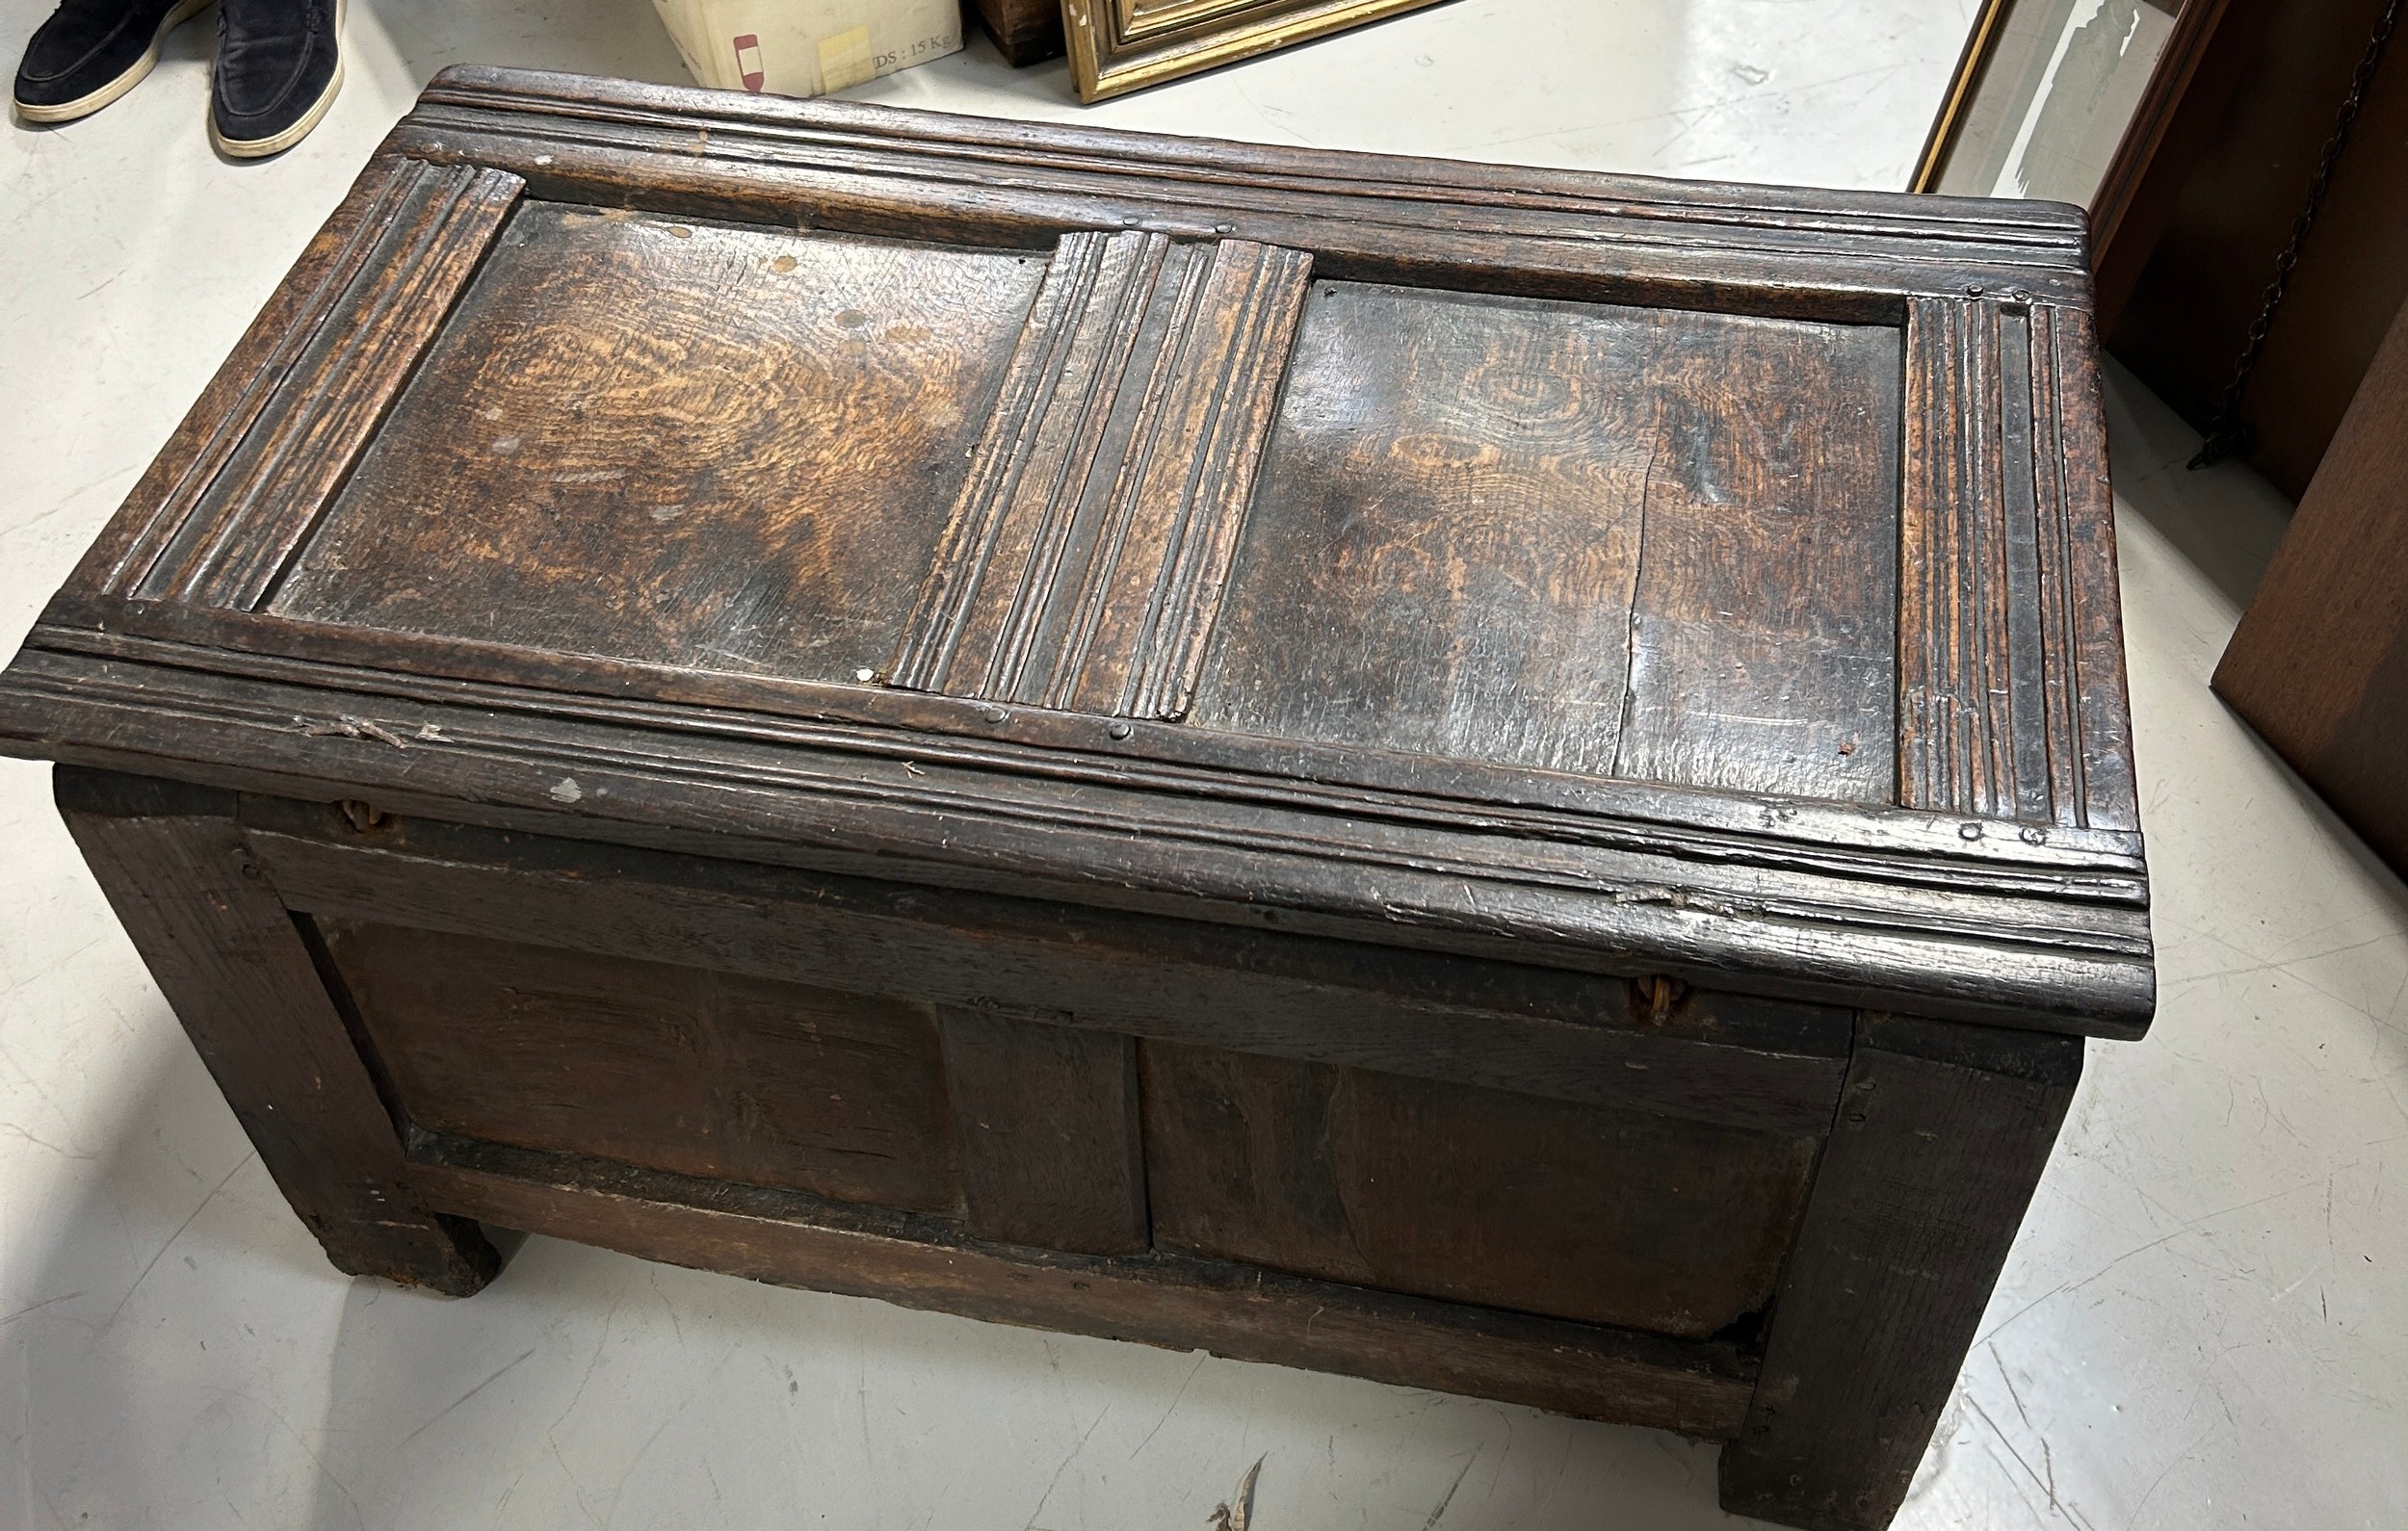 AN OAK COFFER PROBABLY 17TH OR 18TH CENTURY, 92cm x 50cm x 51cm - Image 4 of 4